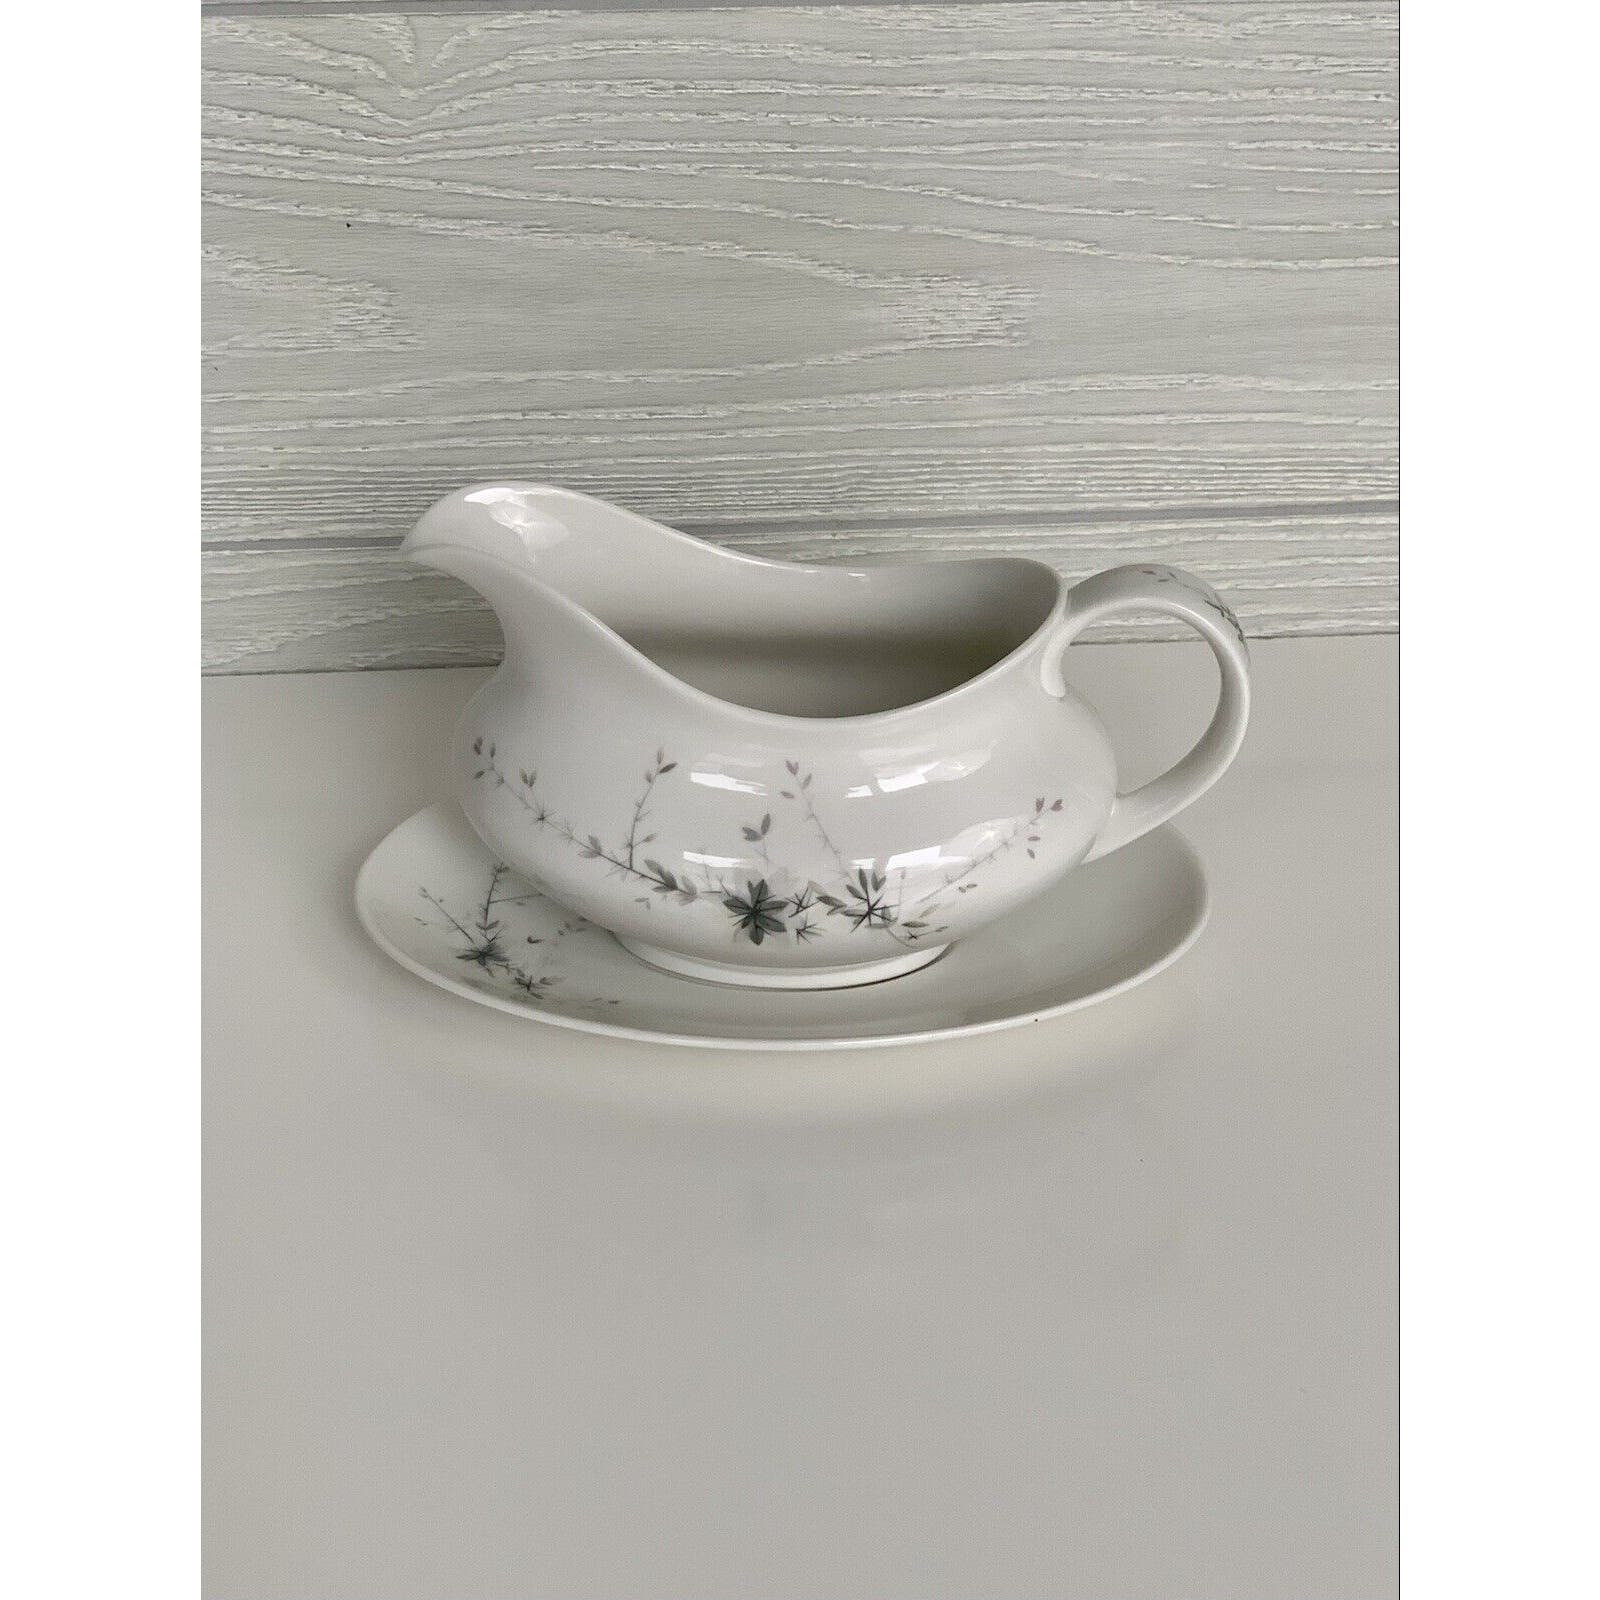 Royal Doulton Greenbrier Gravy Boat with Underplate Mad